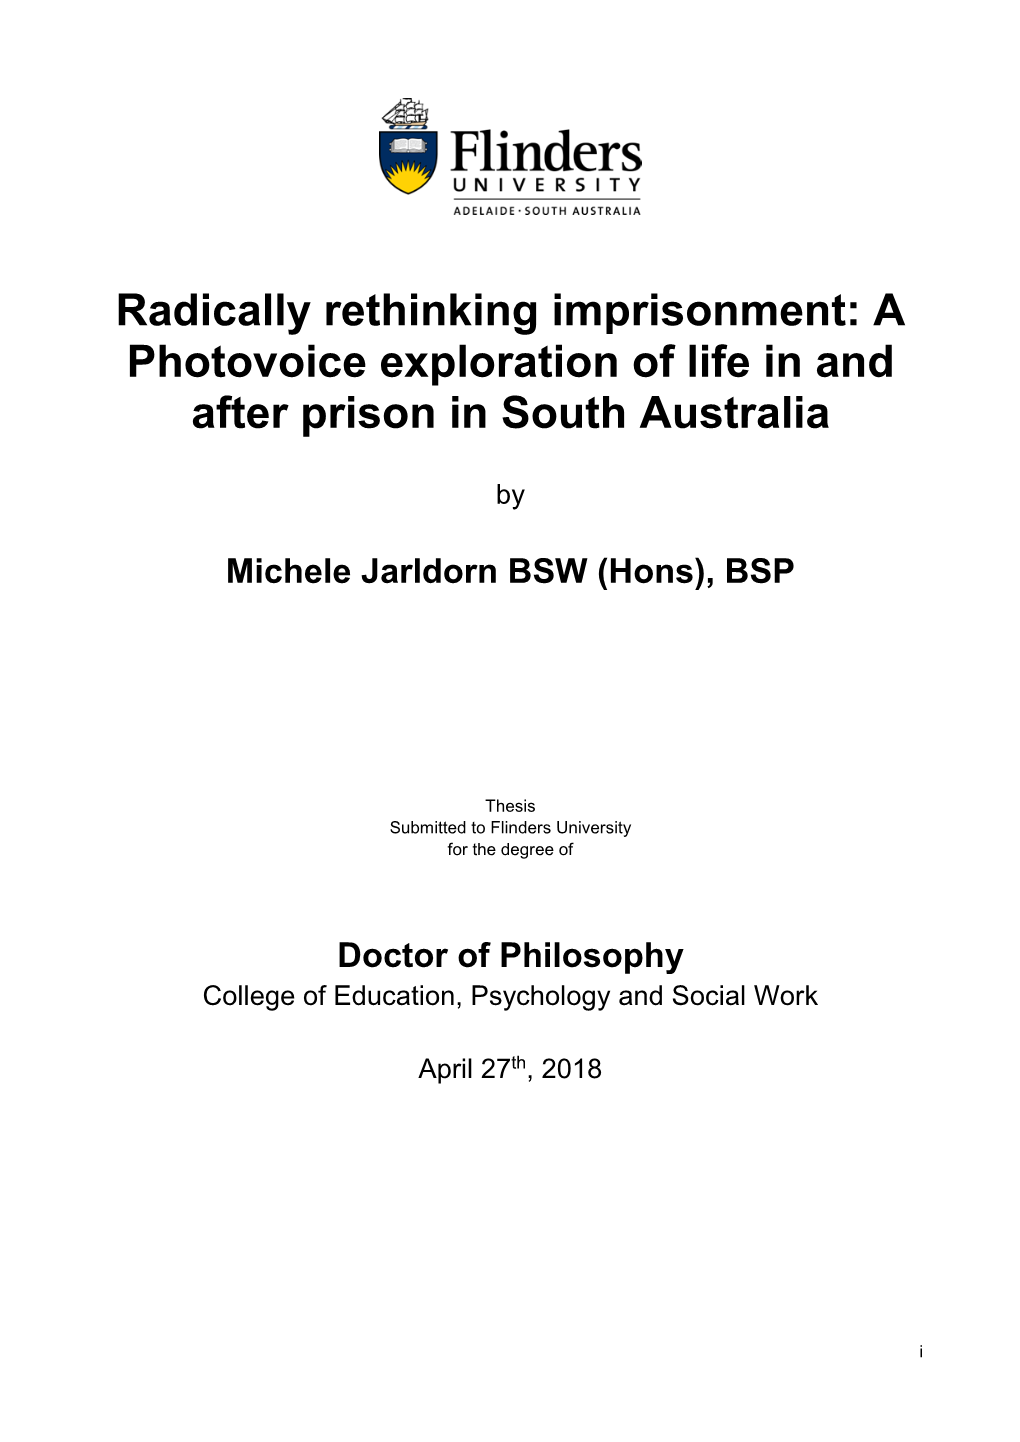 Radically Rethinking Imprisonment: a Photovoice Exploration of Life in and After Prison in South Australia